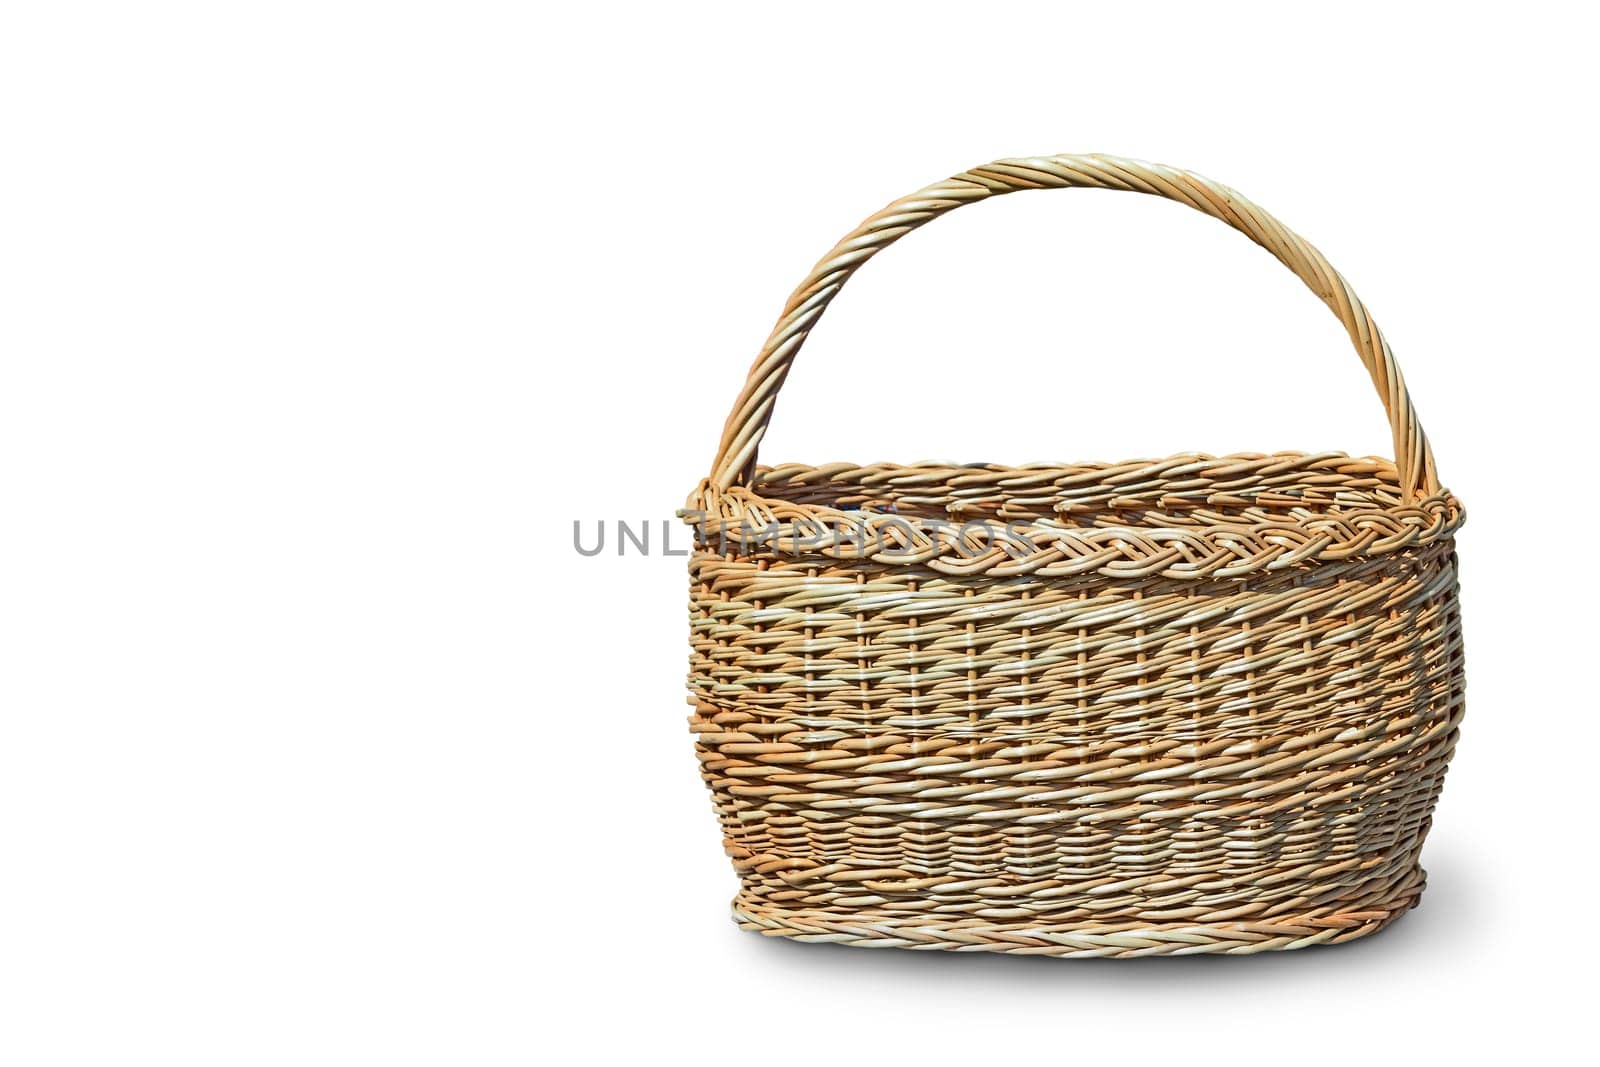 Spacious wicker basket with handle. Presented on a white background.